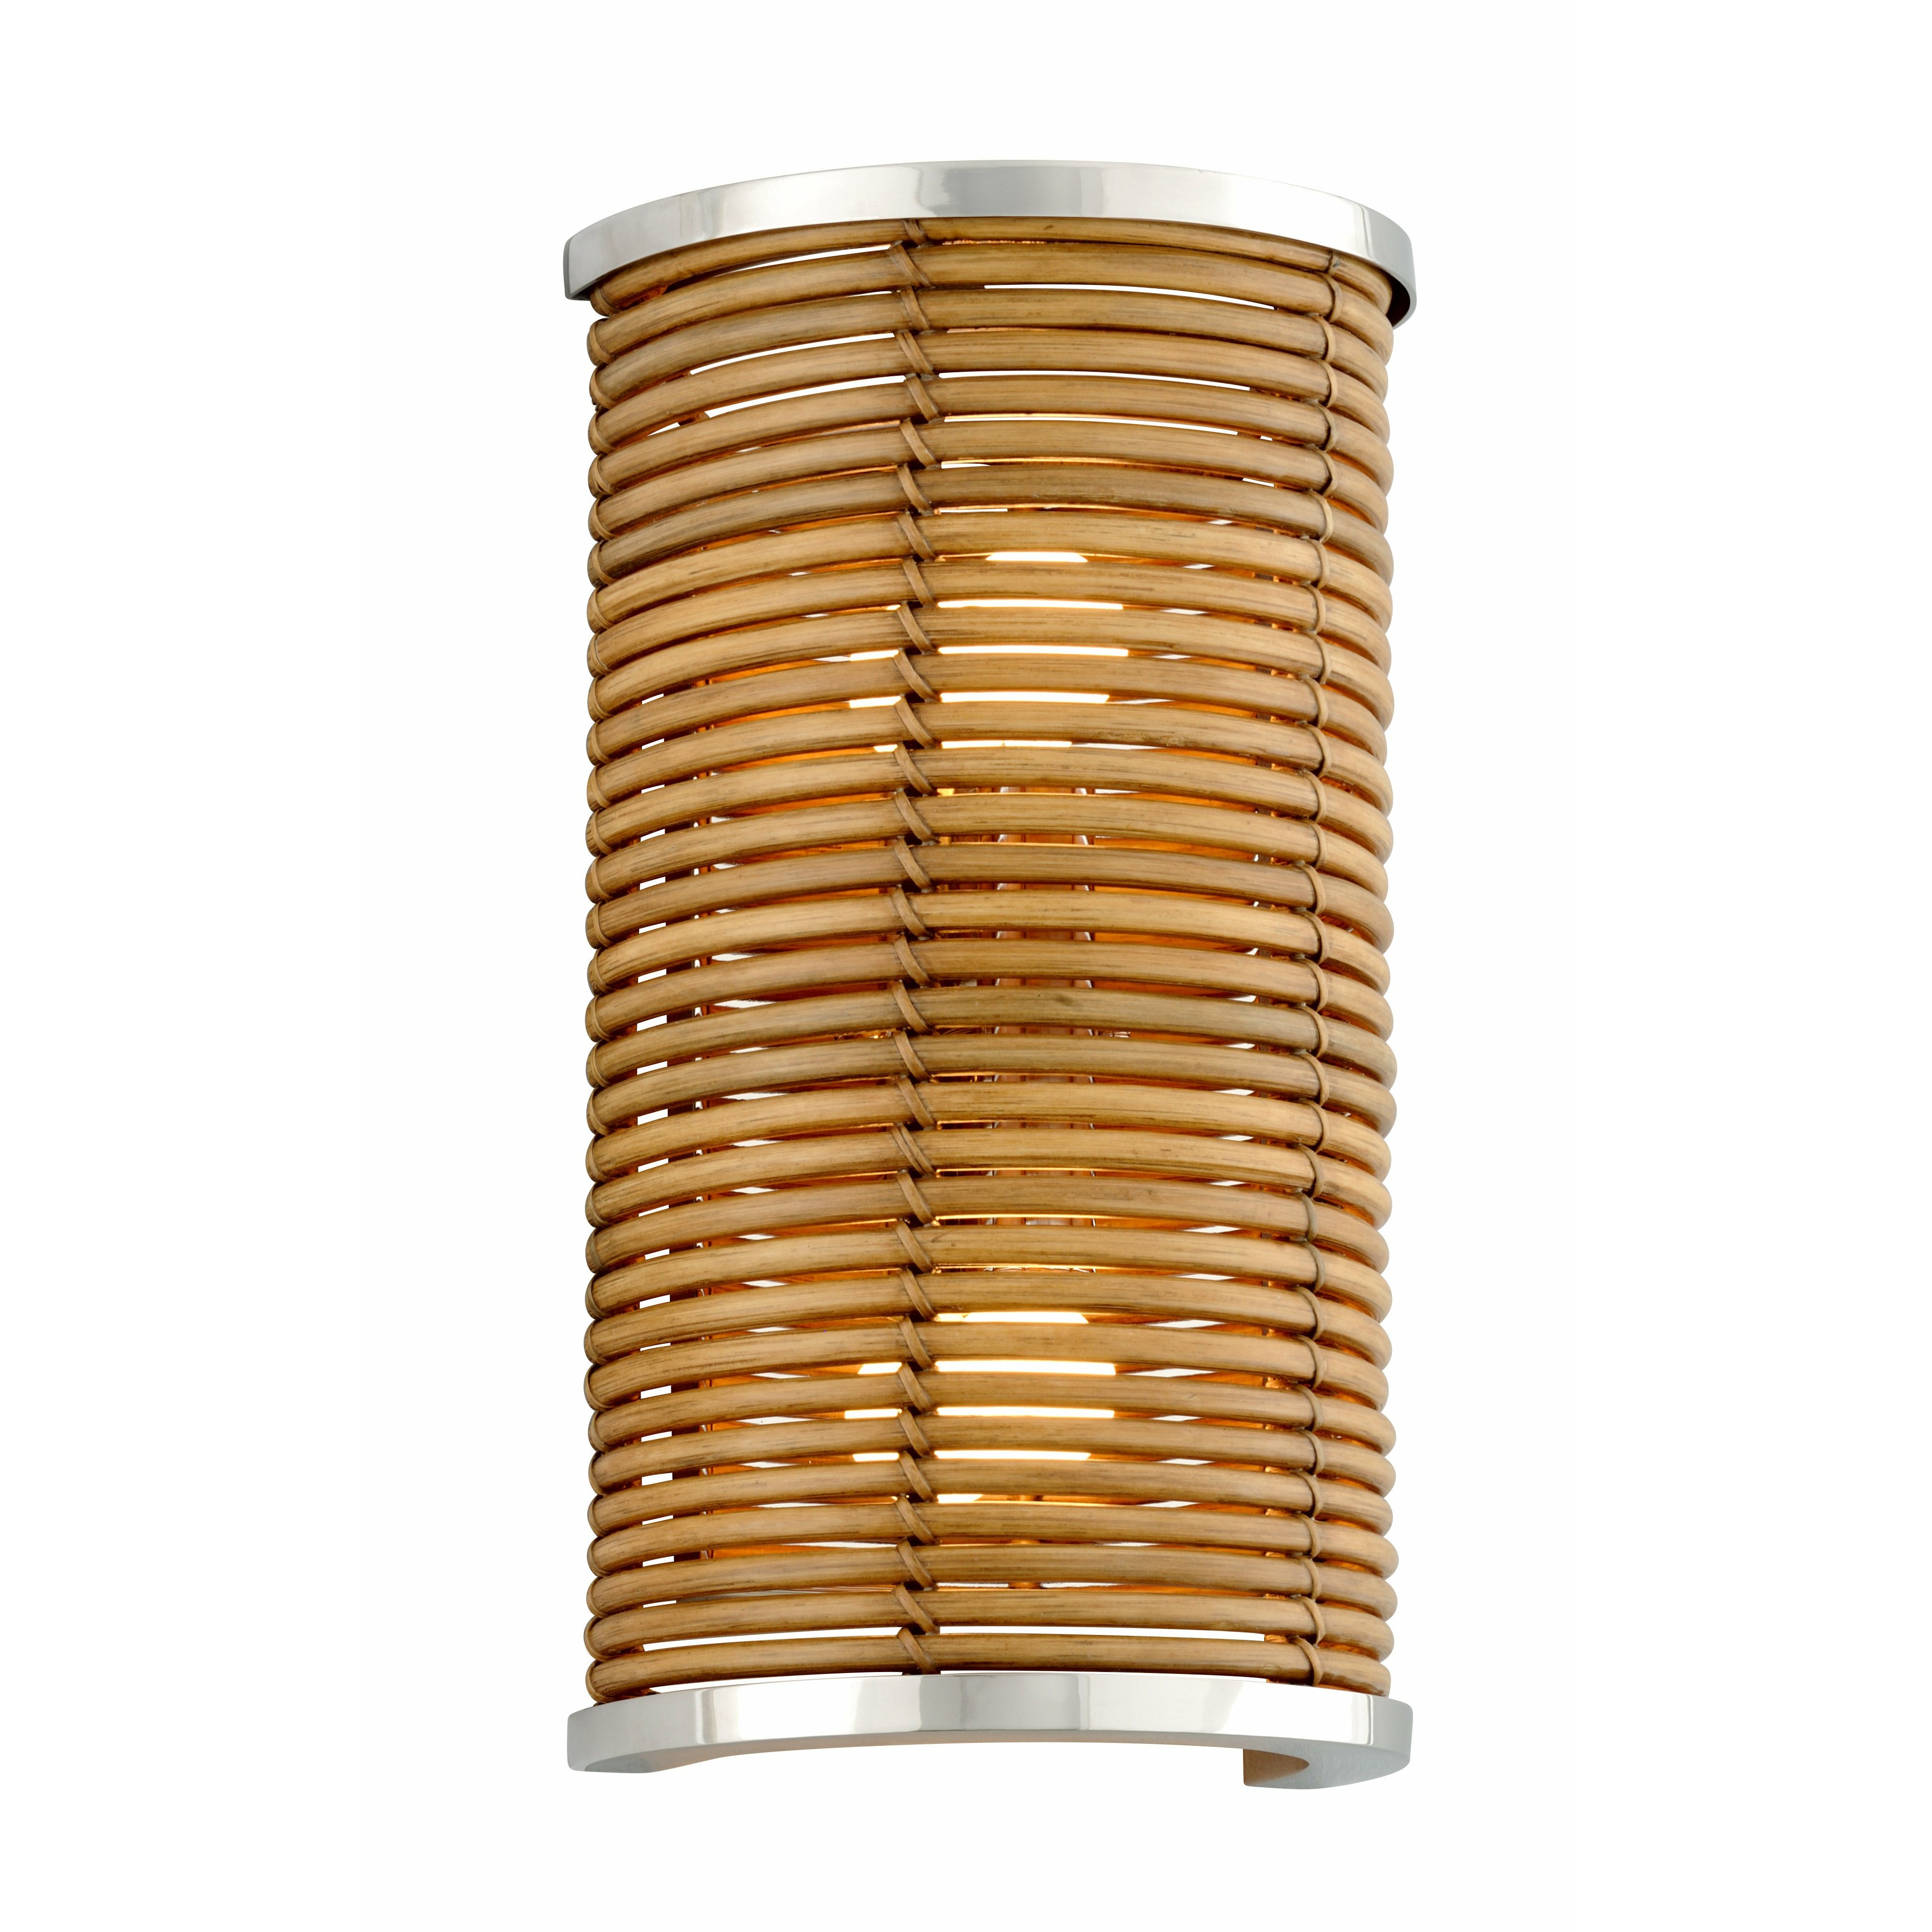 Carayes Sconce Natural Rattan Stainless Steel